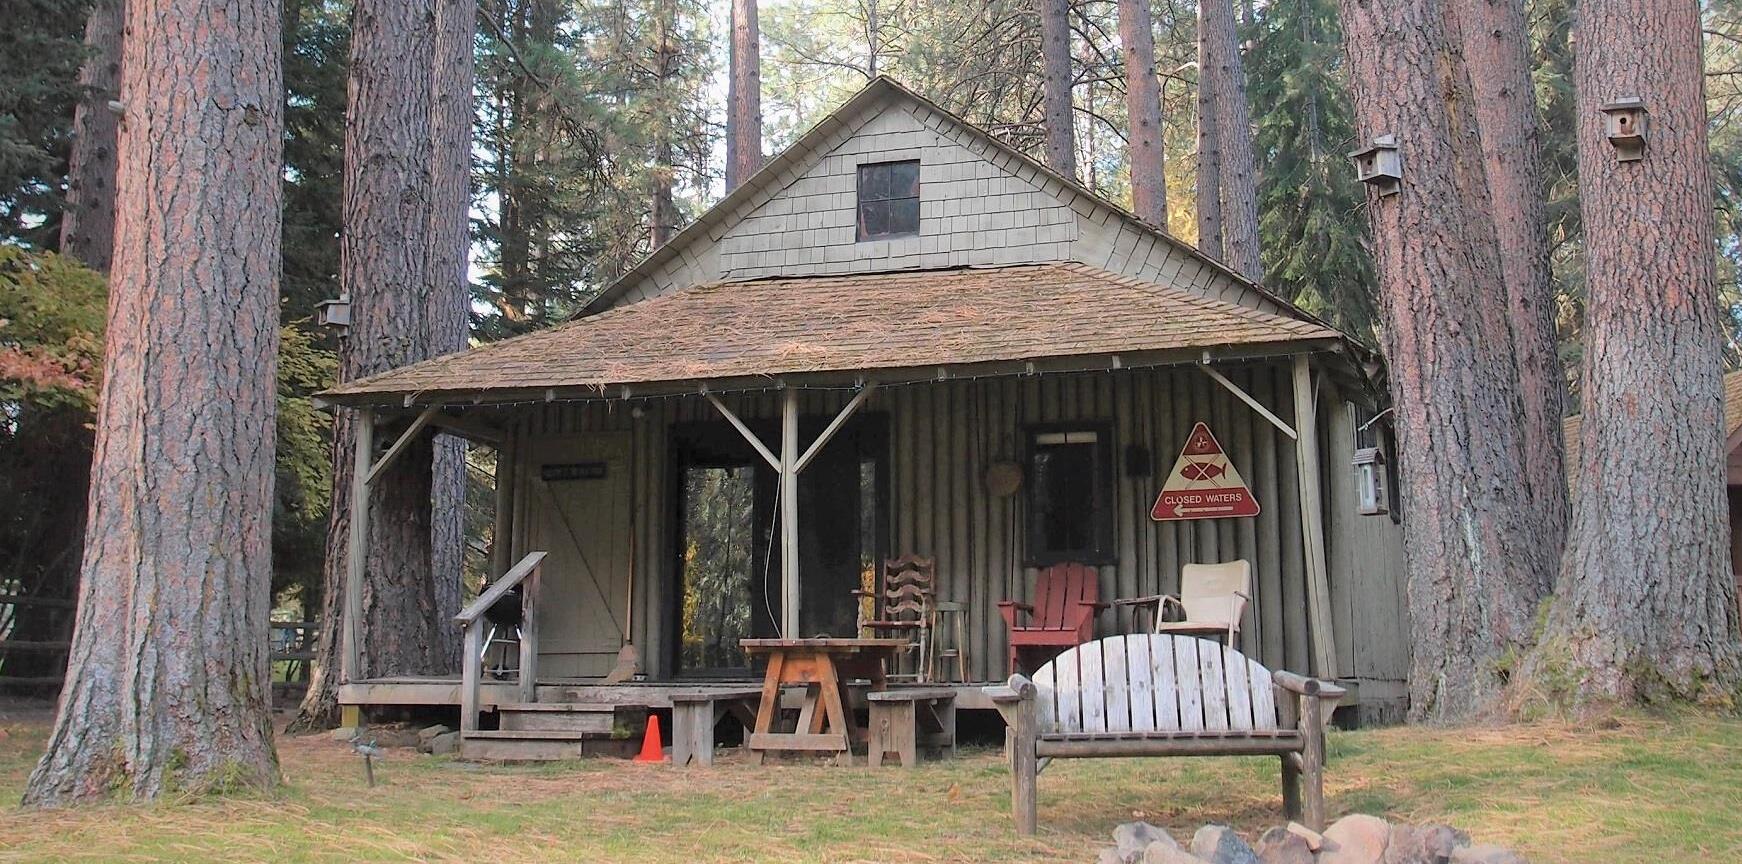 Log Cabin, on the banks of the Metolius River, at Cold Springs Resort in Camp Sherman, Oregon